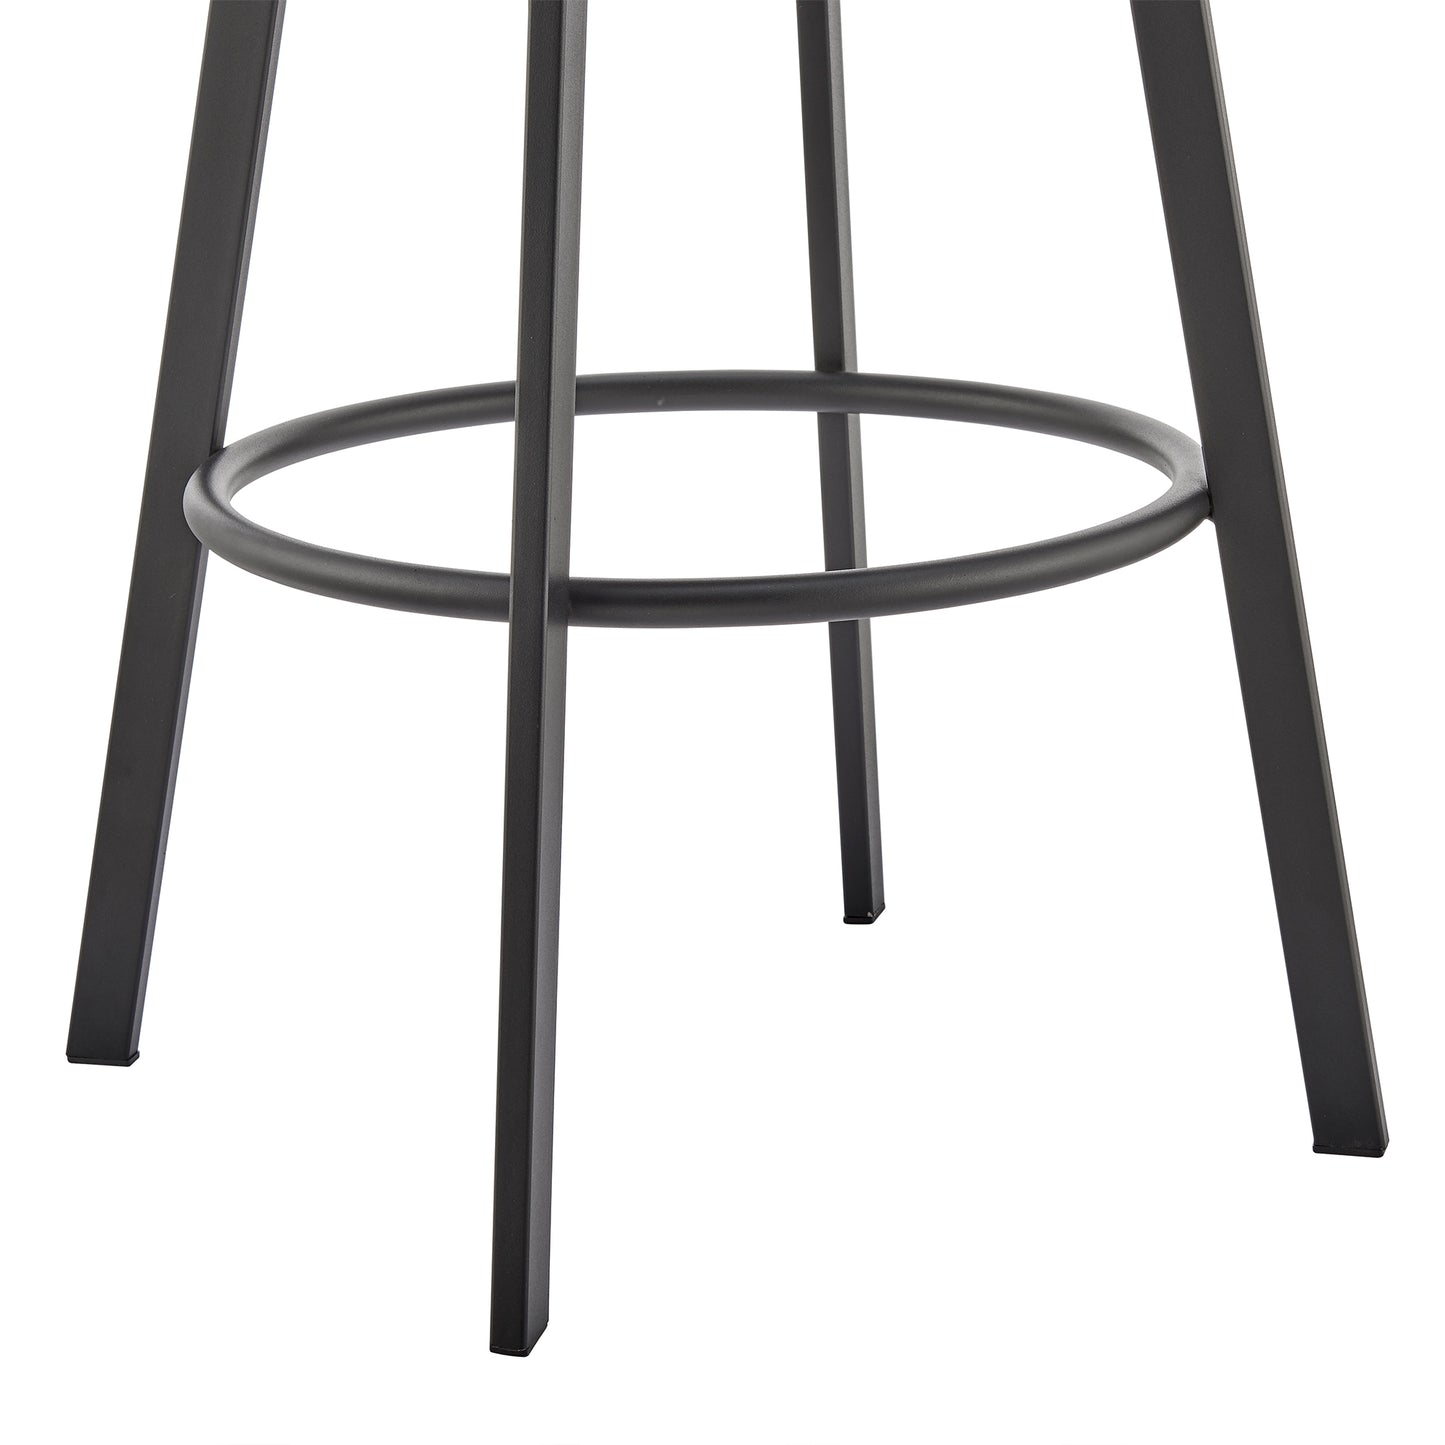 Noran Swivel Bar Stool in Black Metal with Gray Faux Leather